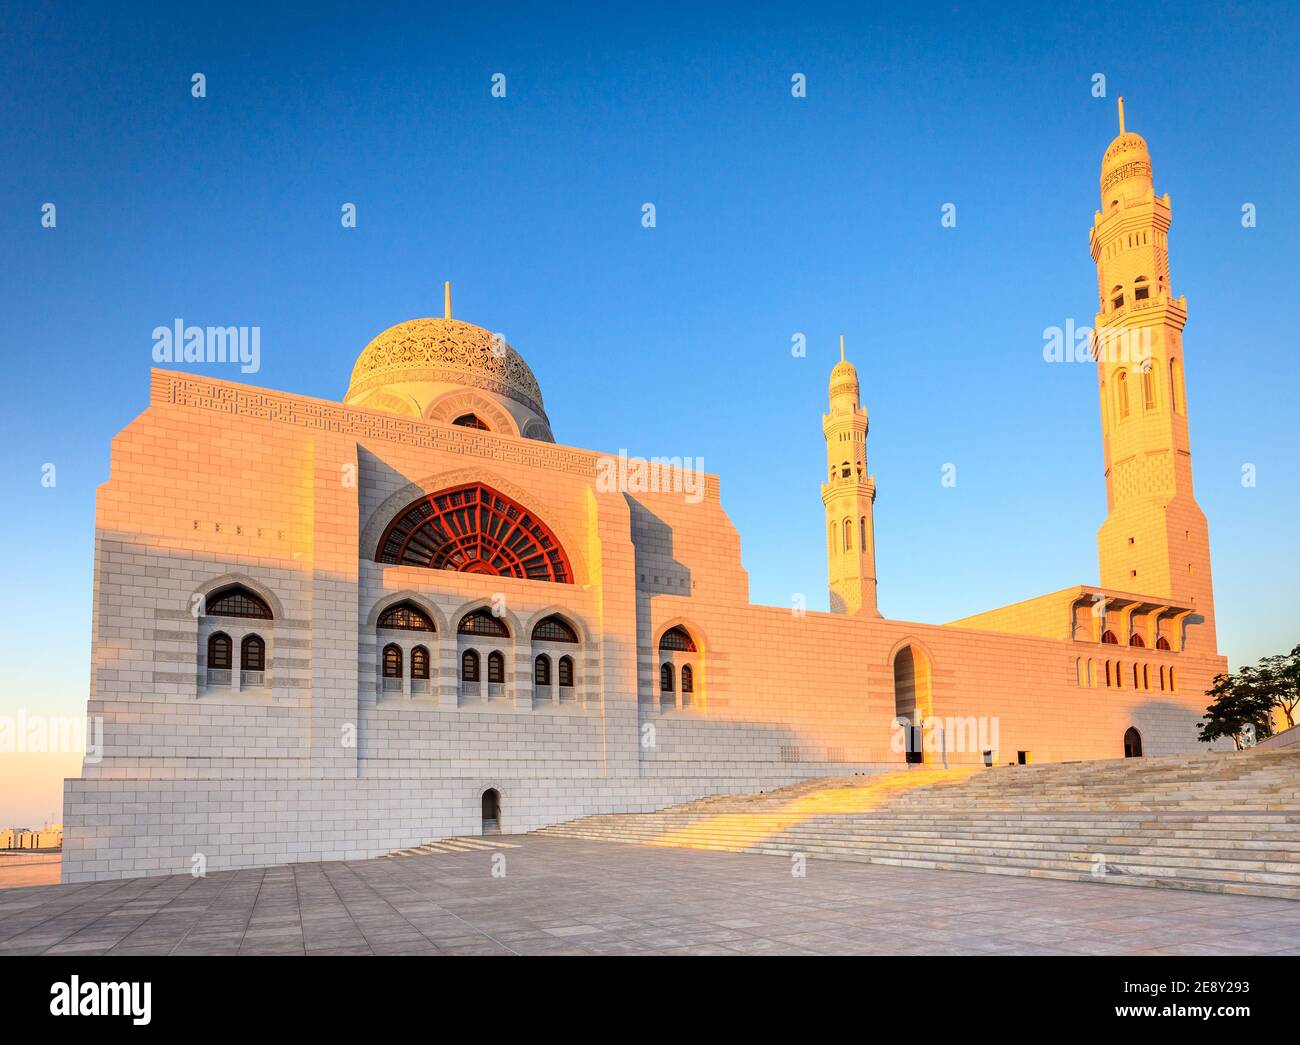 View of new Muhammad al-Amin mosque in Muscat, Oman Stock Photo